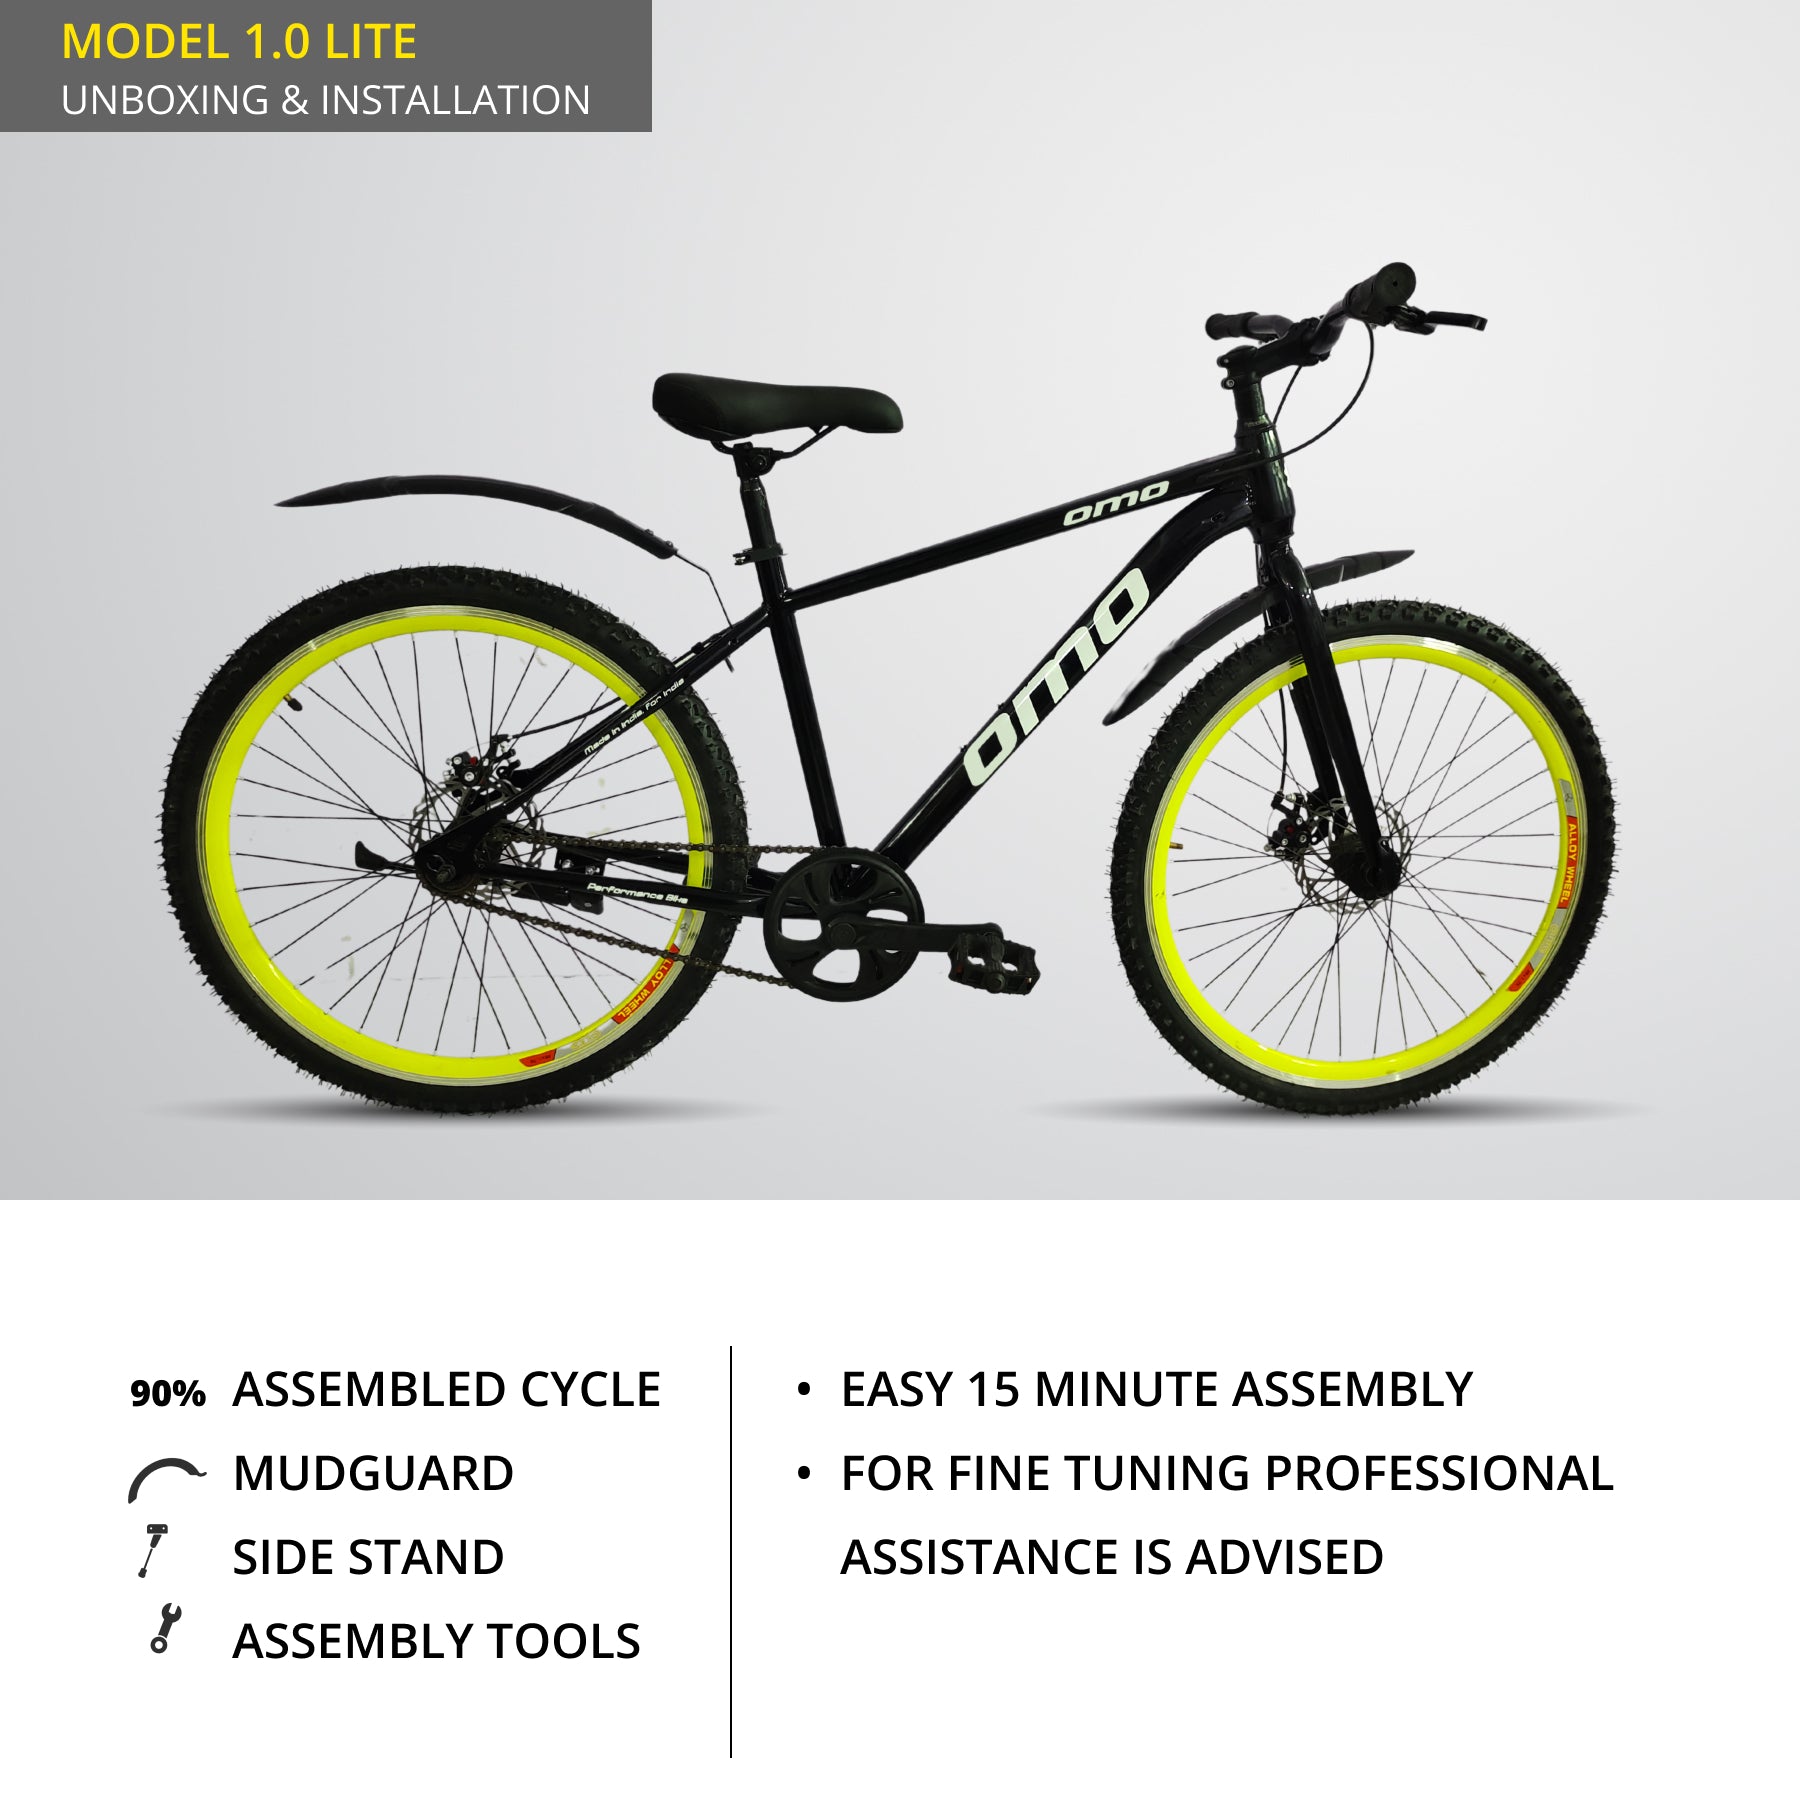 Best choice for an economical hybrid bike: Omobikes Model 1.0 in a trendy green and black color, perfect for men and adults seeking quality on a budget